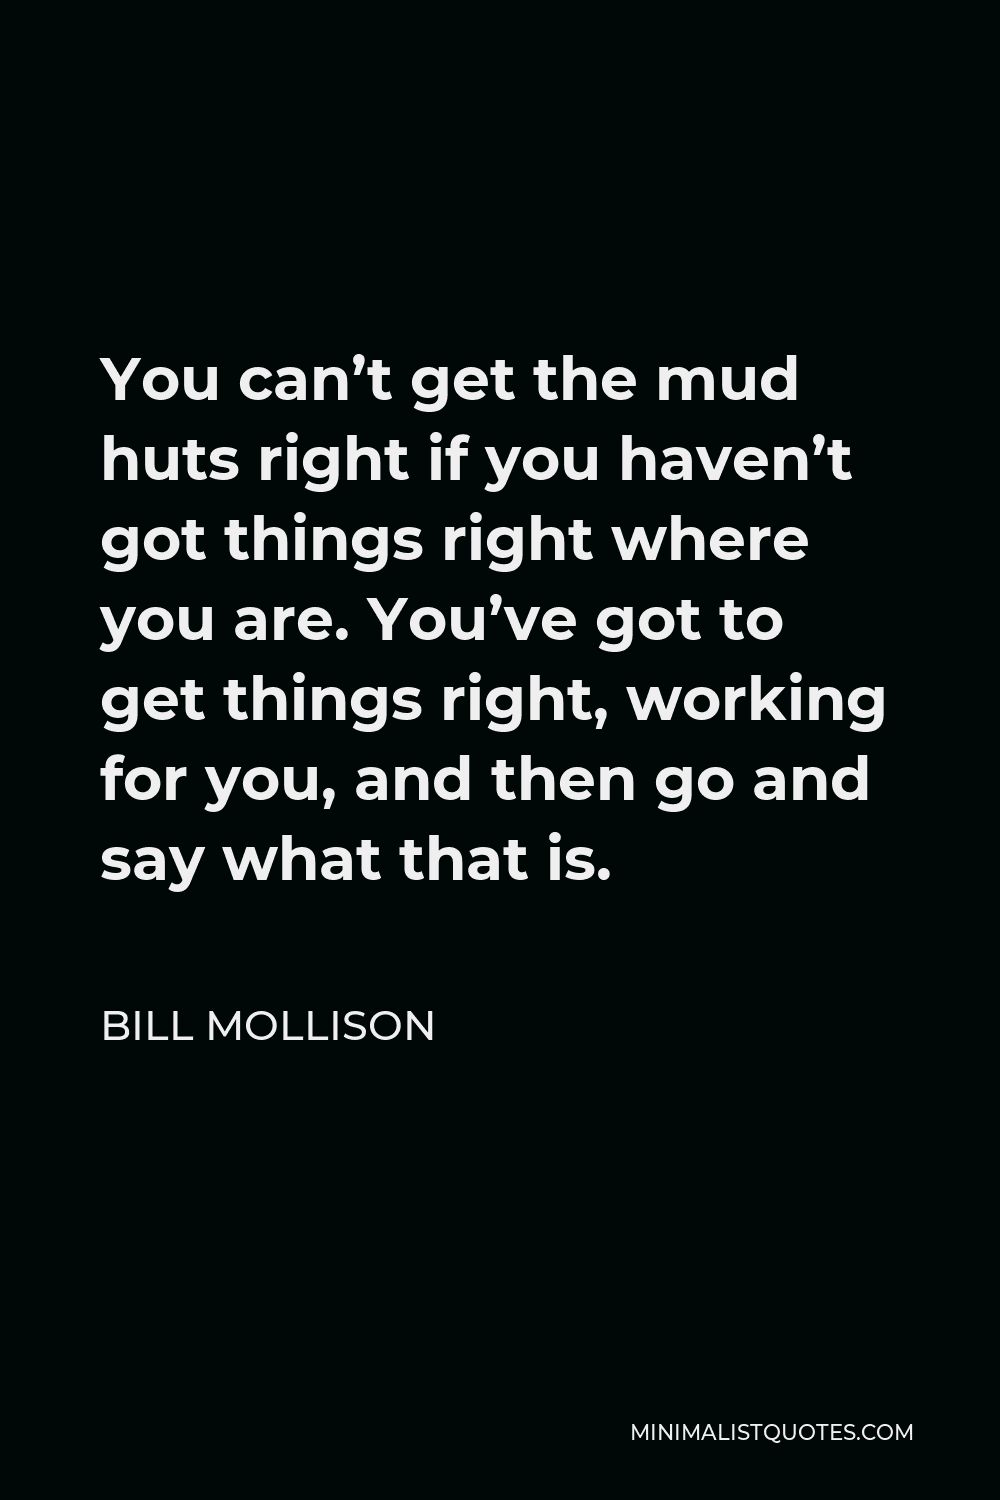 Bill Mollison Quote - You can’t get the mud huts right if you haven’t got things right where you are. You’ve got to get things right, working for you, and then go and say what that is.